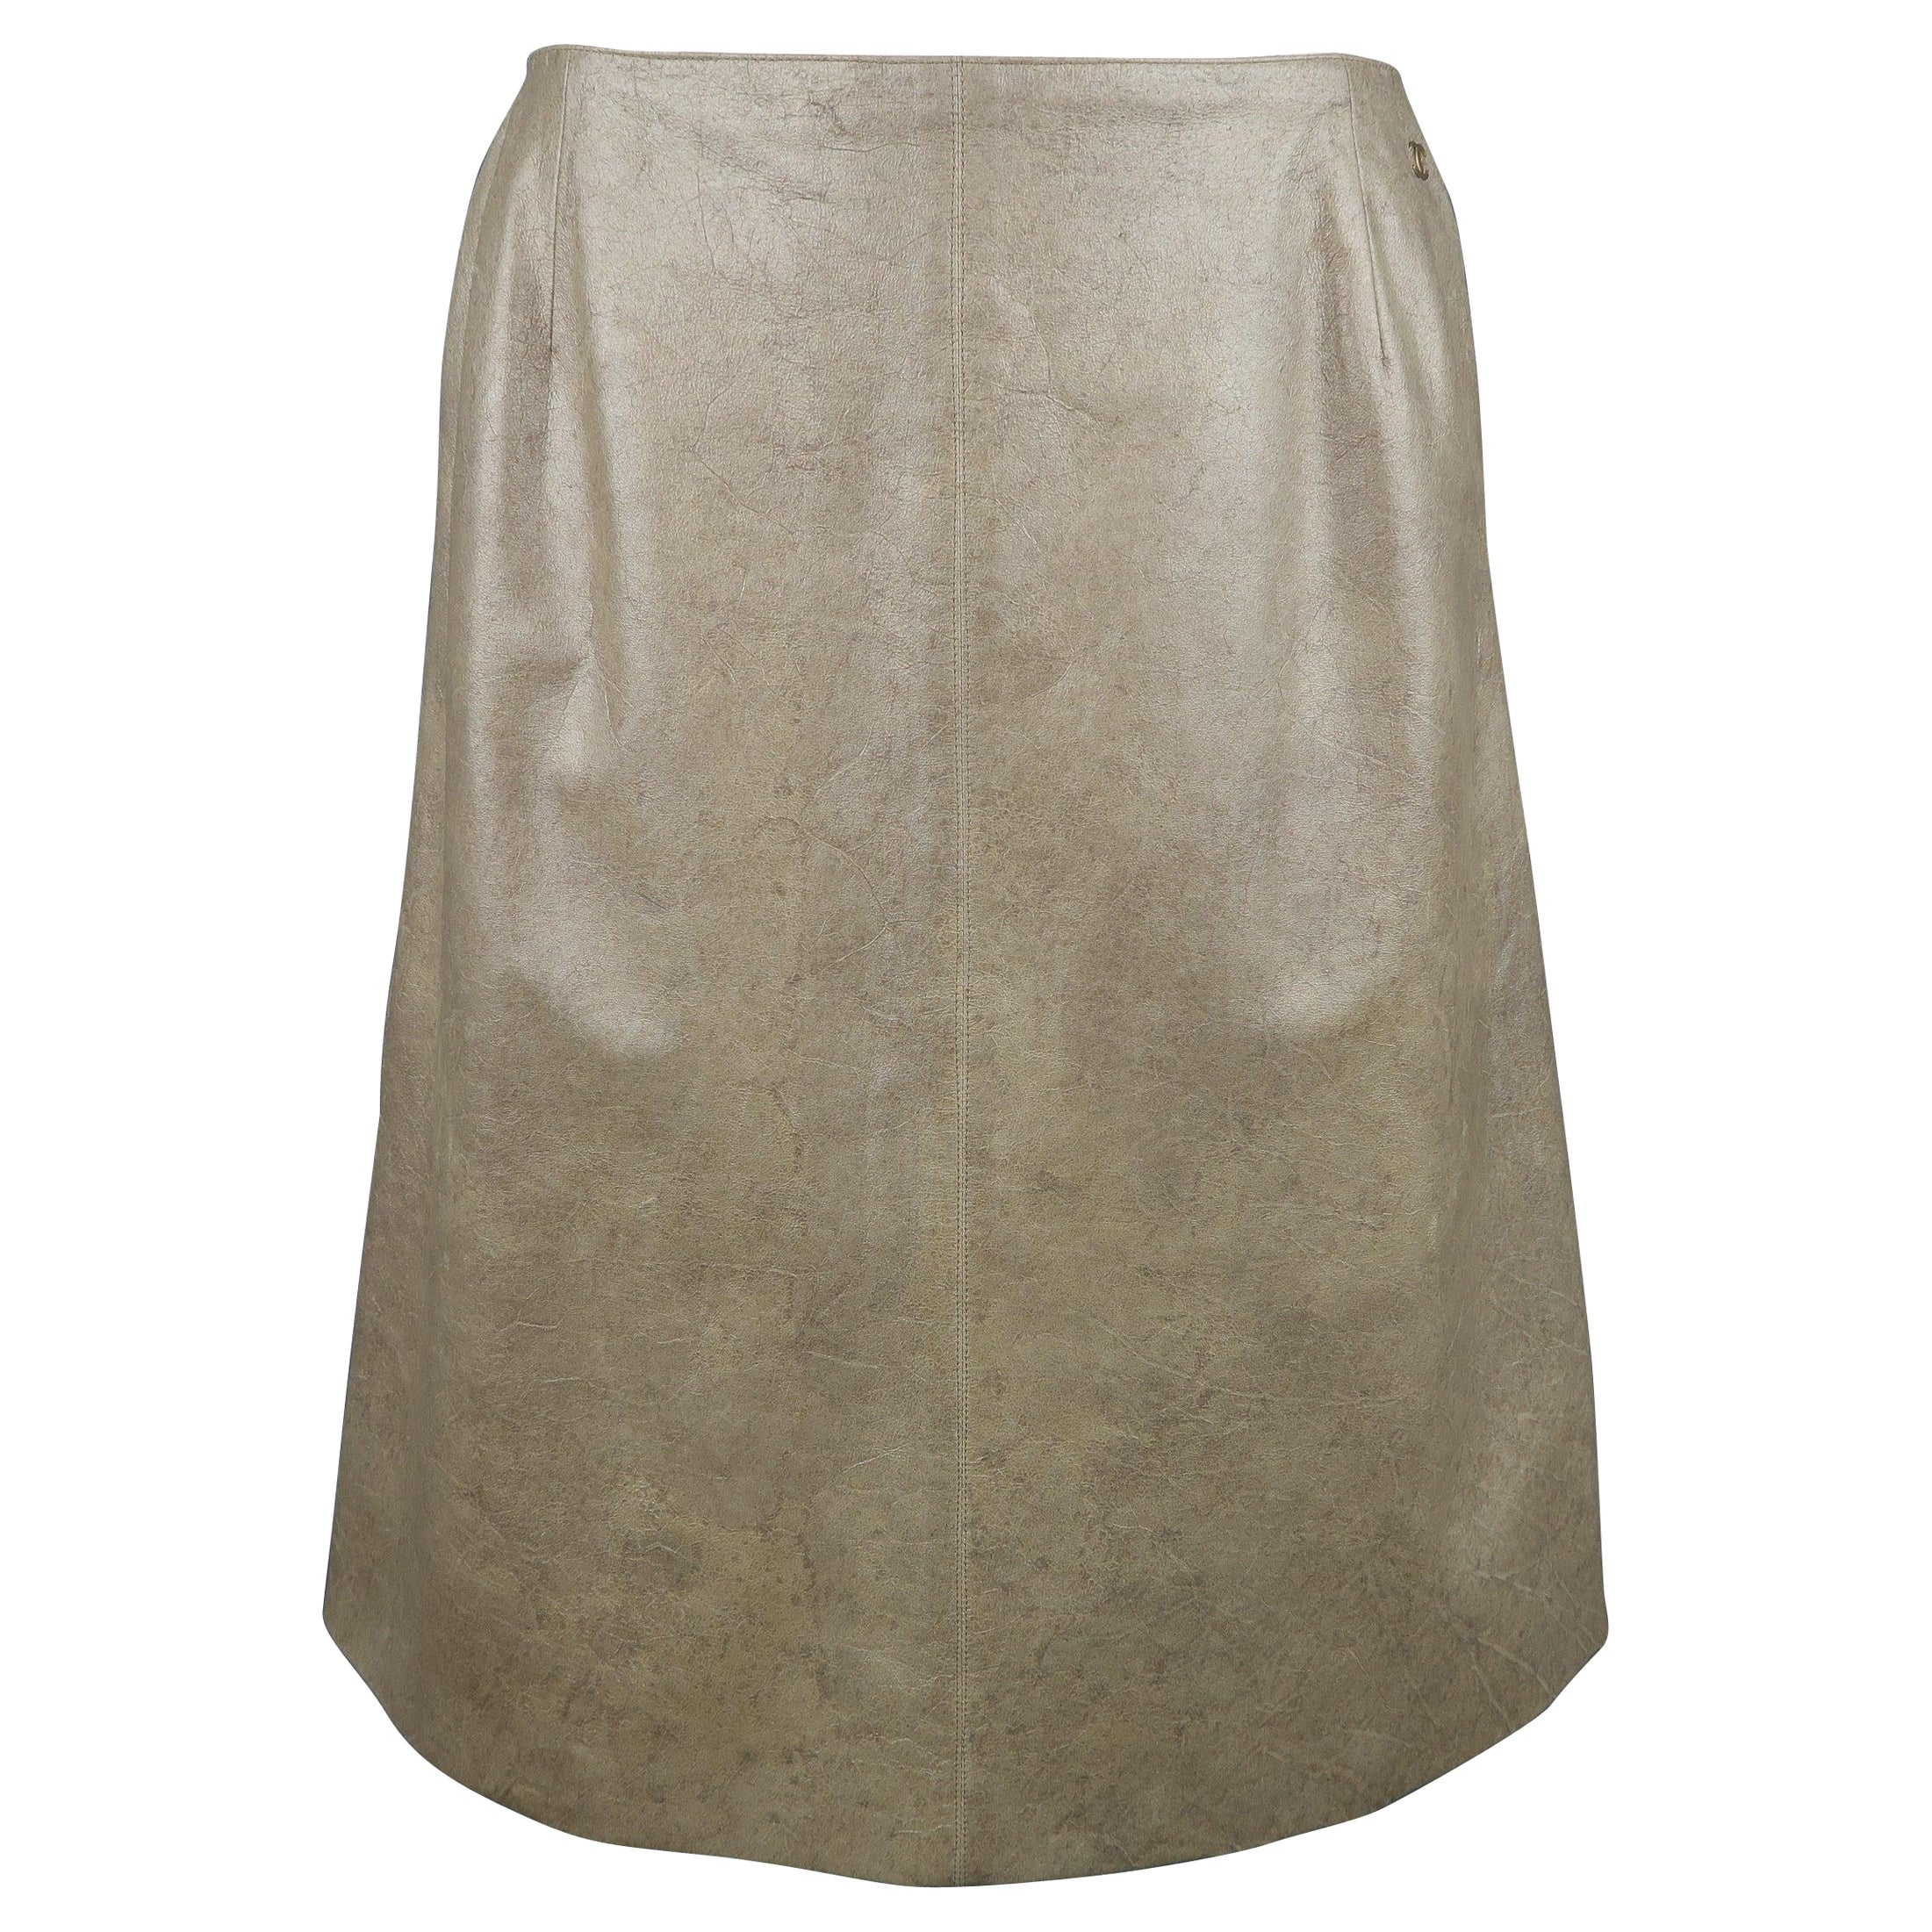 CHANEL Size 8 Metallic Gold Marbled Leather A Line Skirt